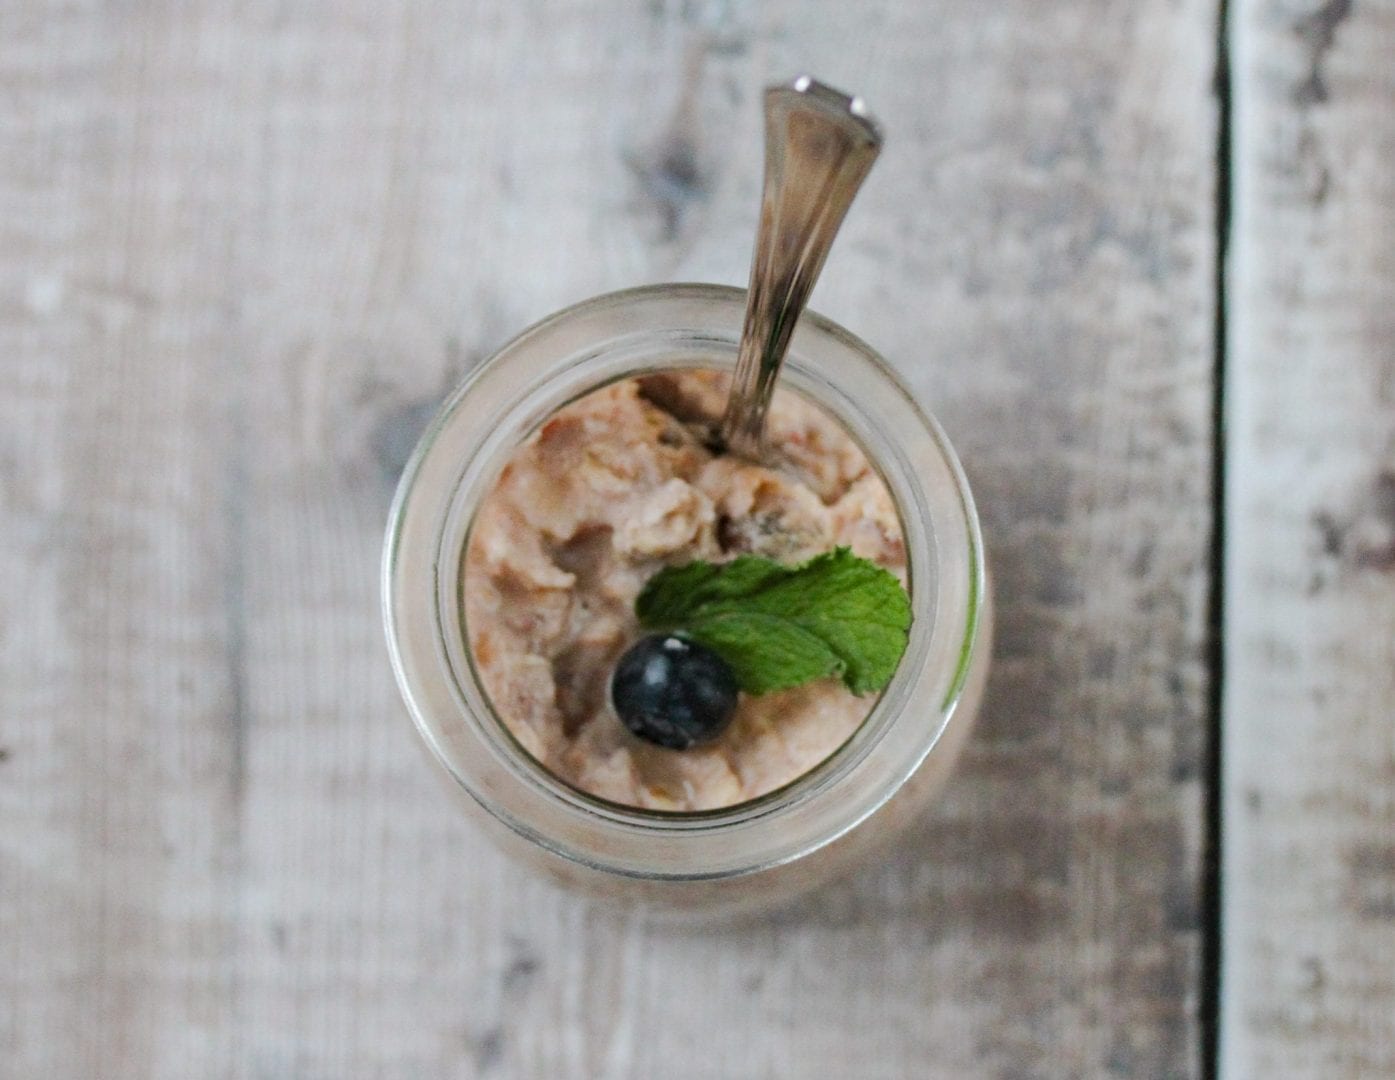 soaked oats - fruit and oats - healthy breakfast recipes 